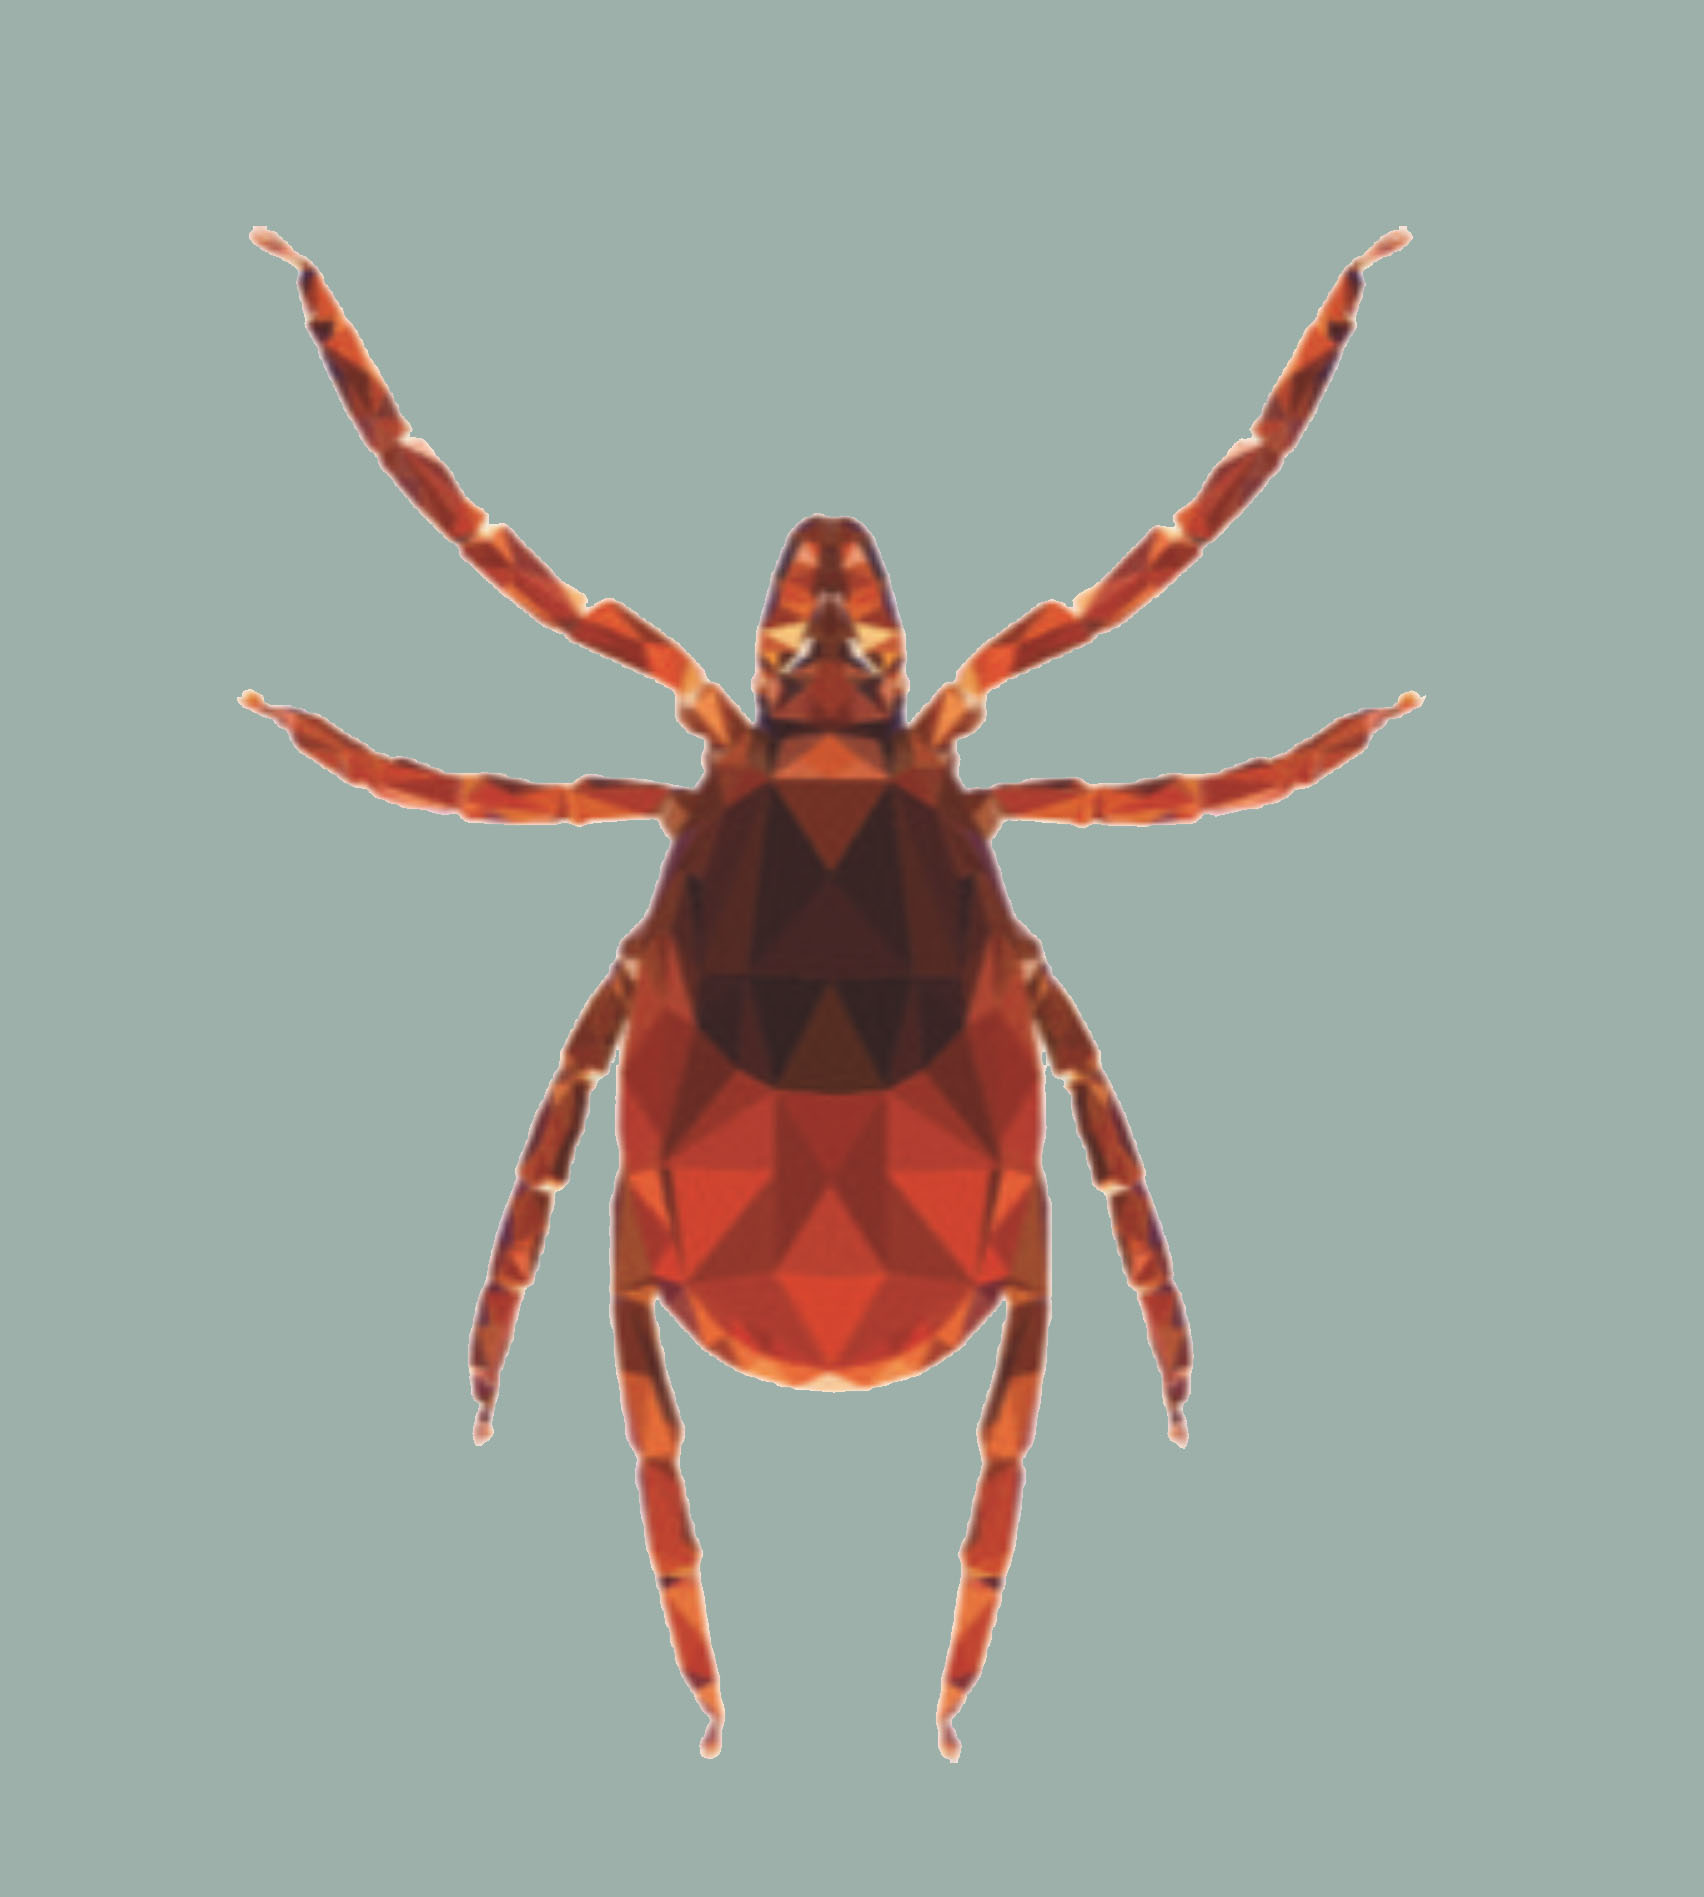 Stylized tick representing Lyme disease